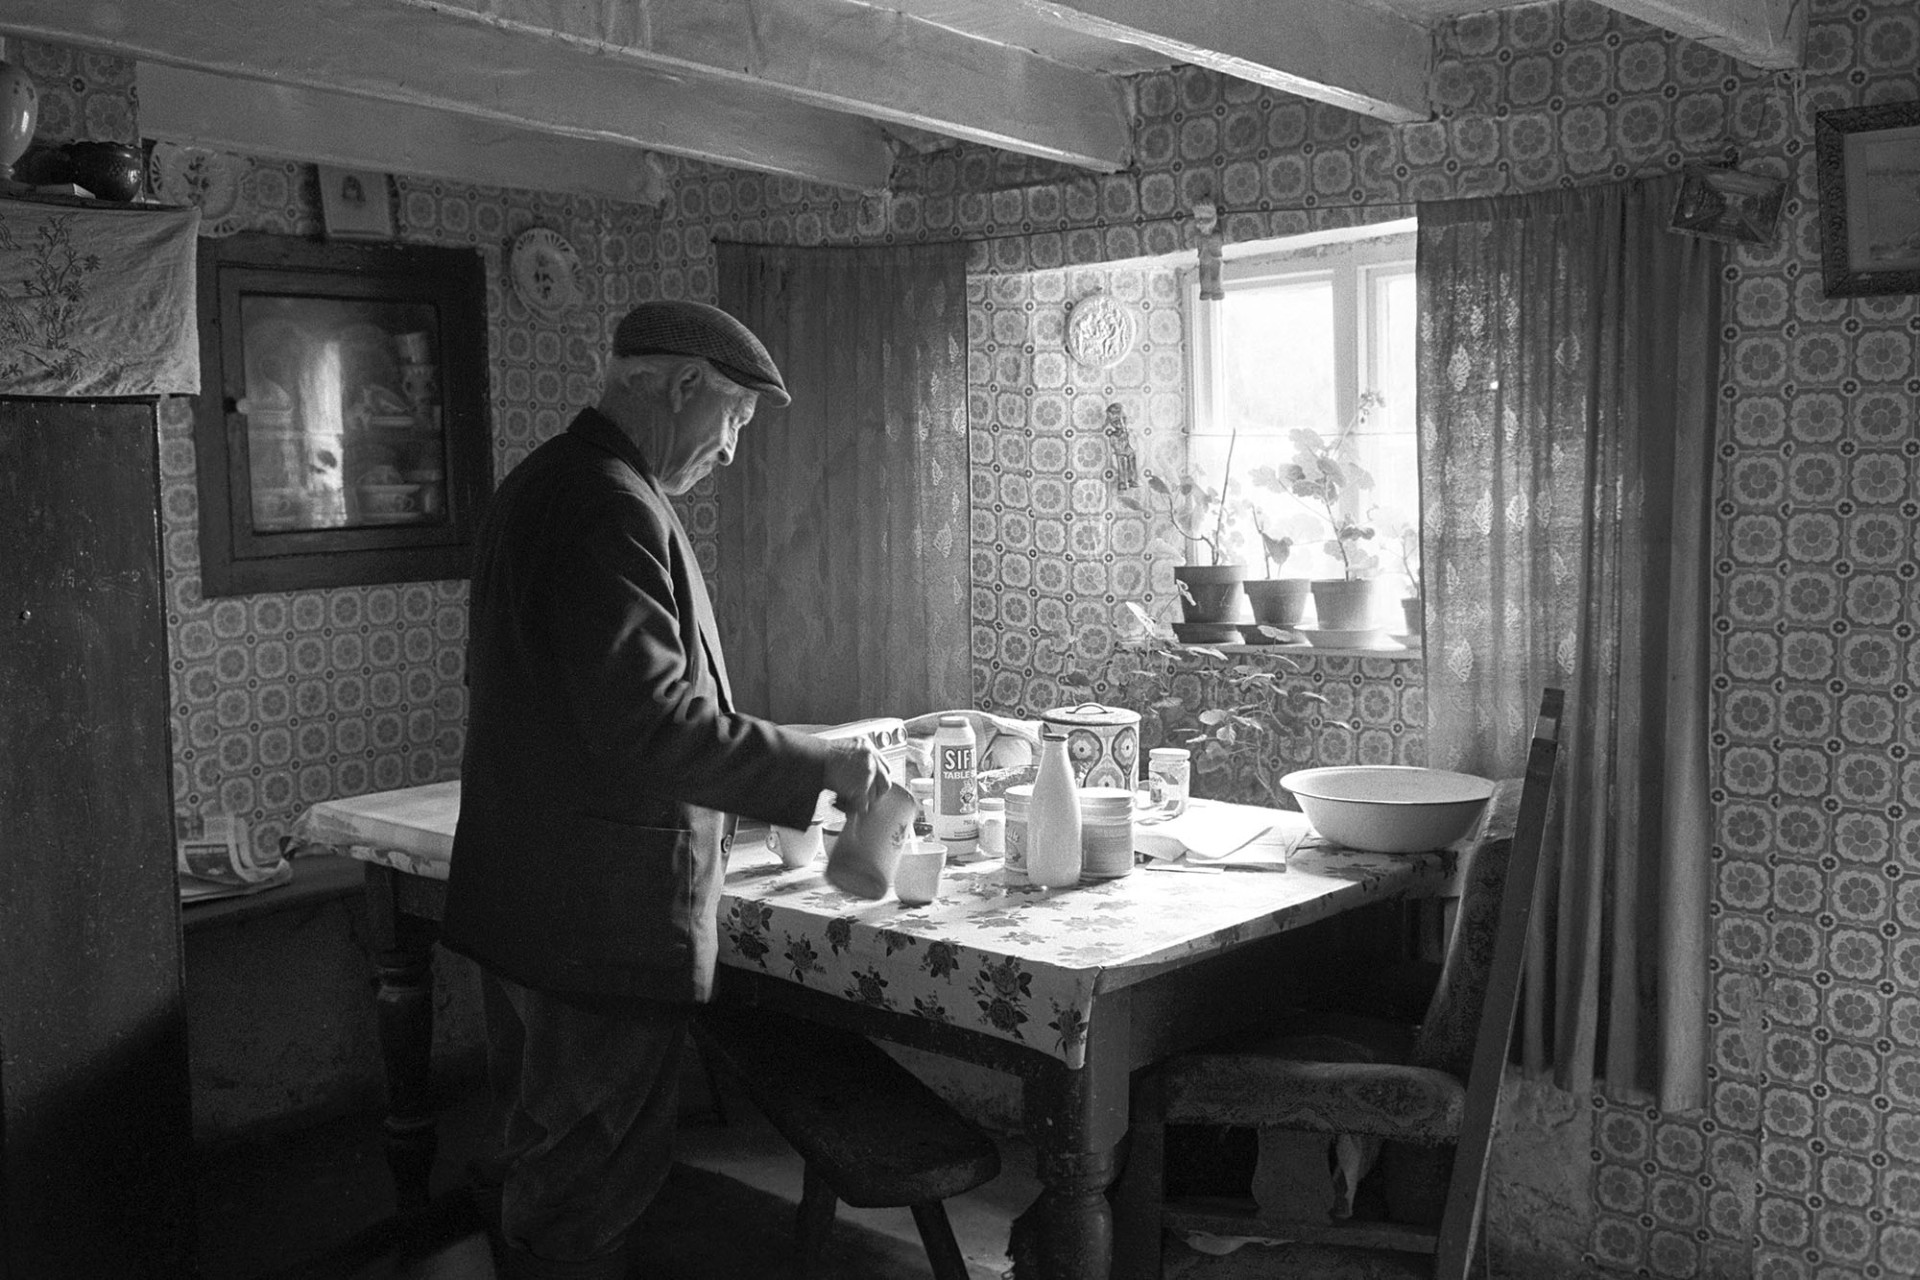 Man pouring cup of tea at farmhouse table, pot plants in window. 
[Wilfie Spiers making a cup of tea on the table in his kitchen at Mount Pleasant, Beamsworthy. The walls are covered in patterned wallpaper ad pot plants are in the windowsill. Beams are also visible on the ceiling.]